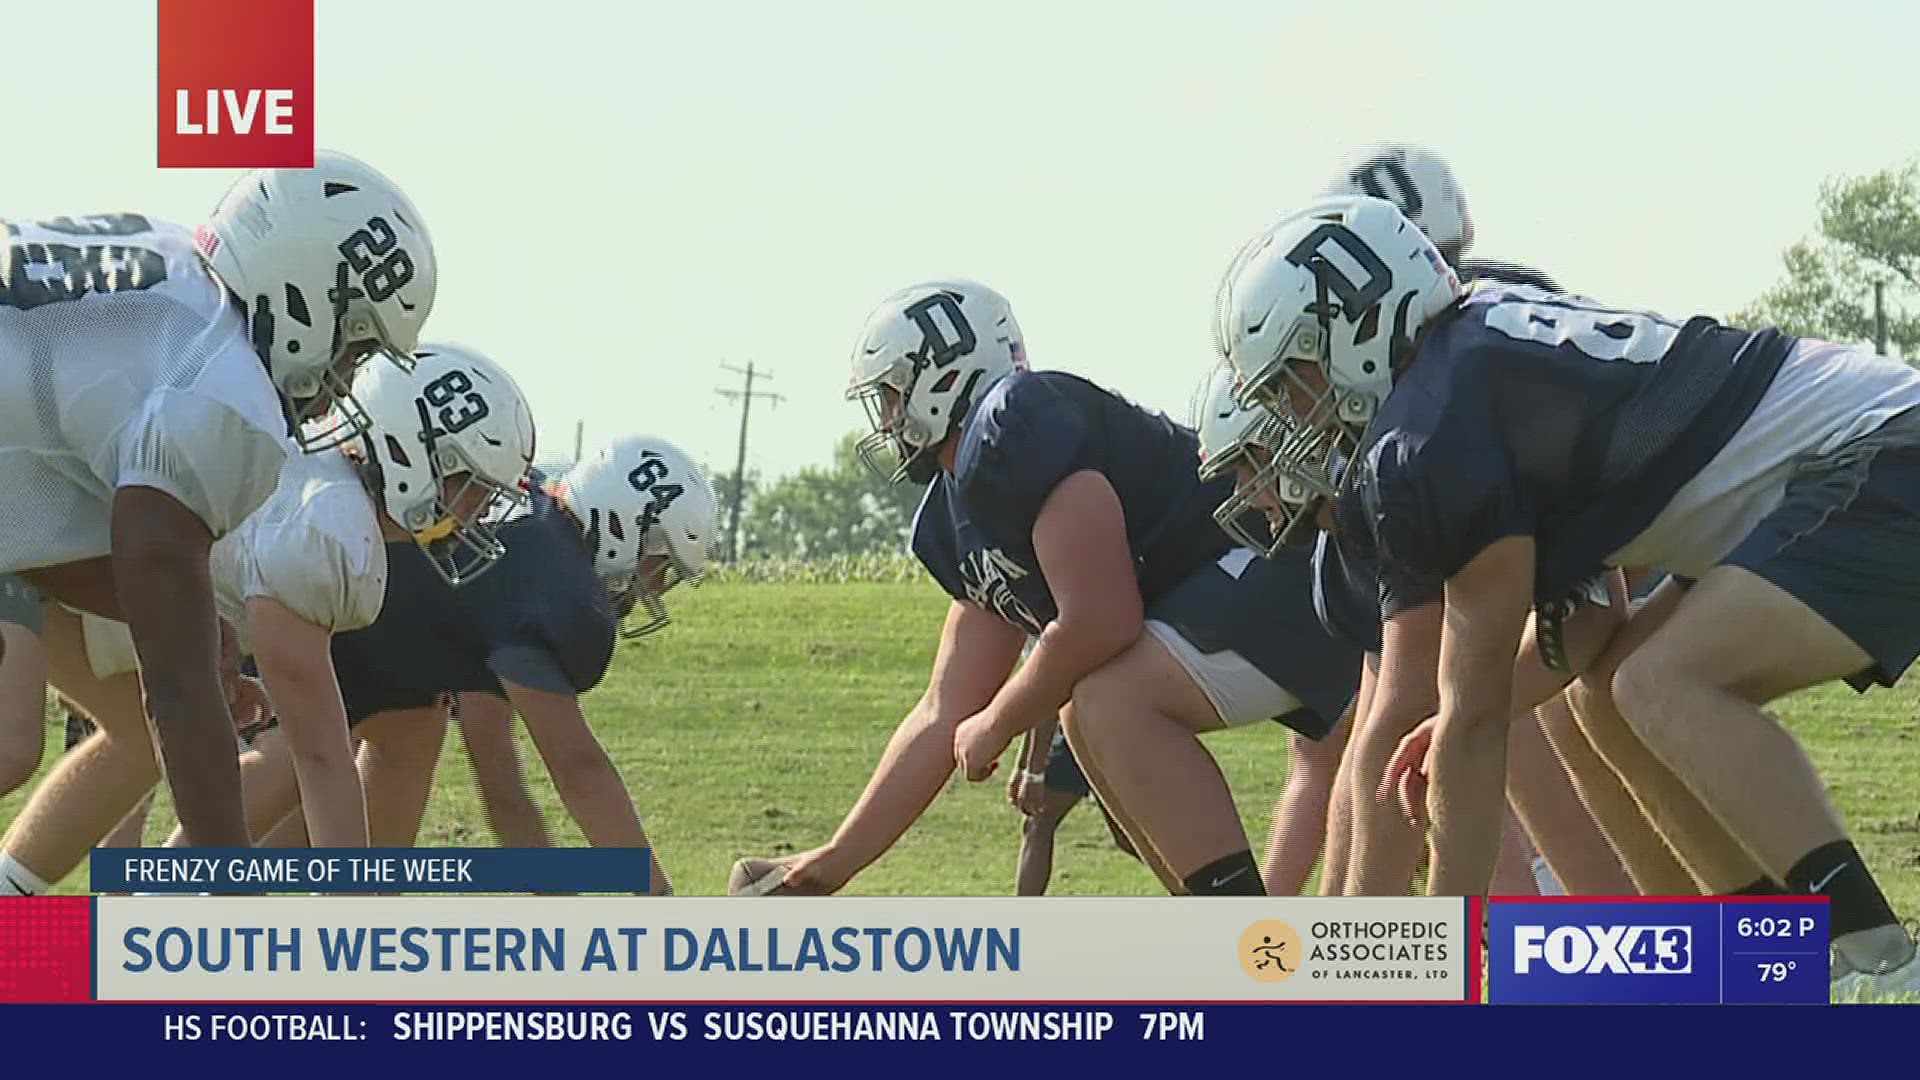 Week 4 Game of the Week Preview - South Western at Dallastown